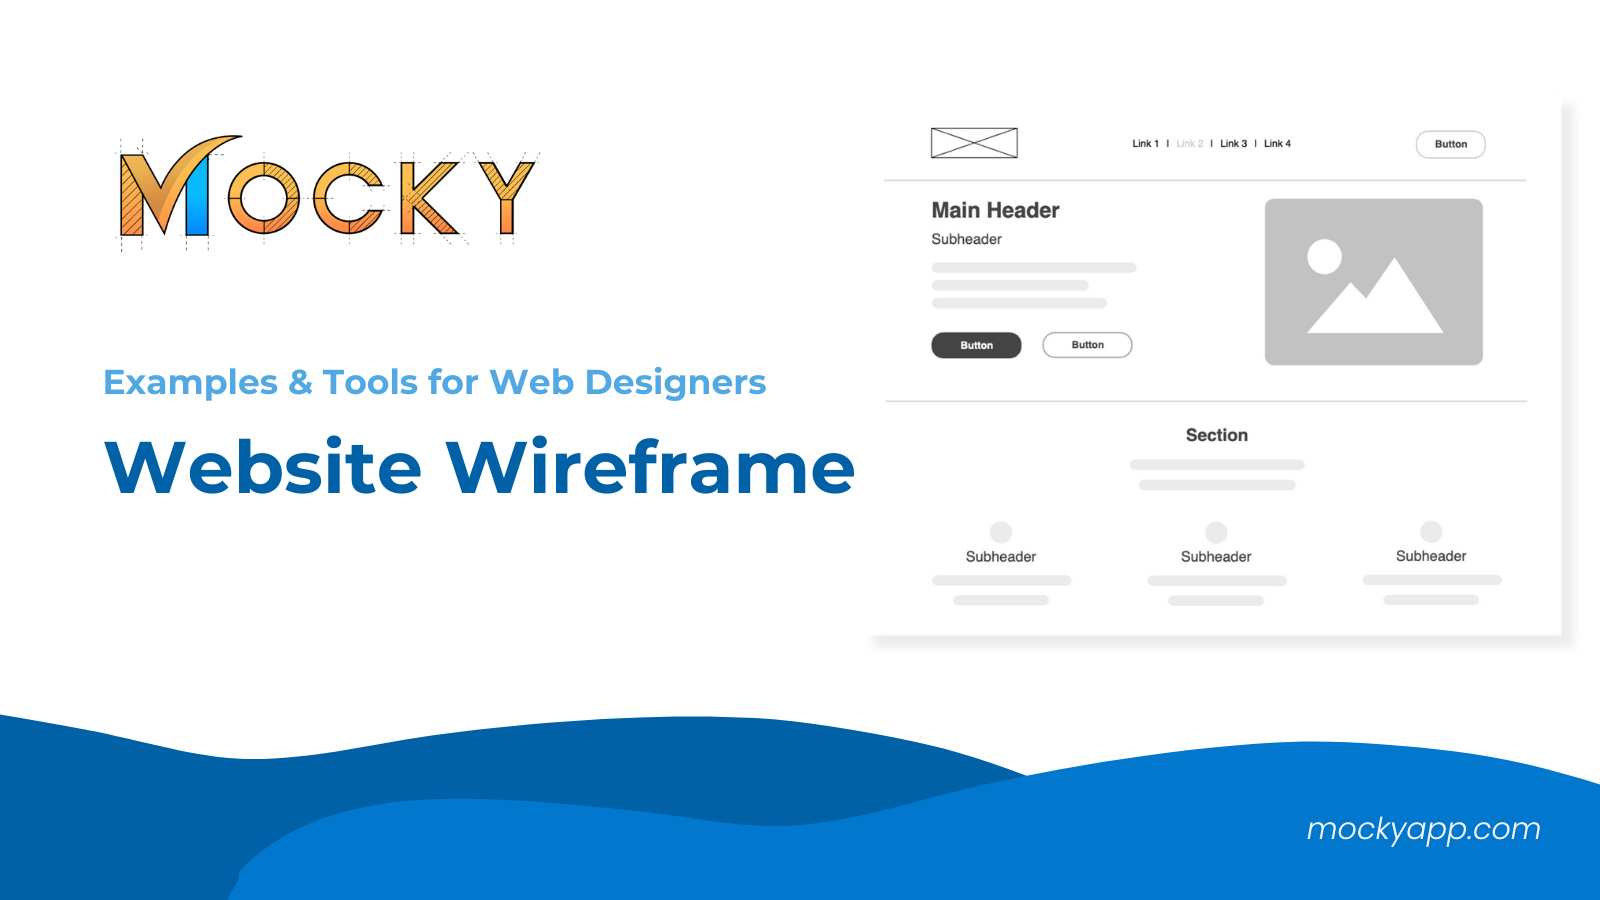 What is a website wireframe